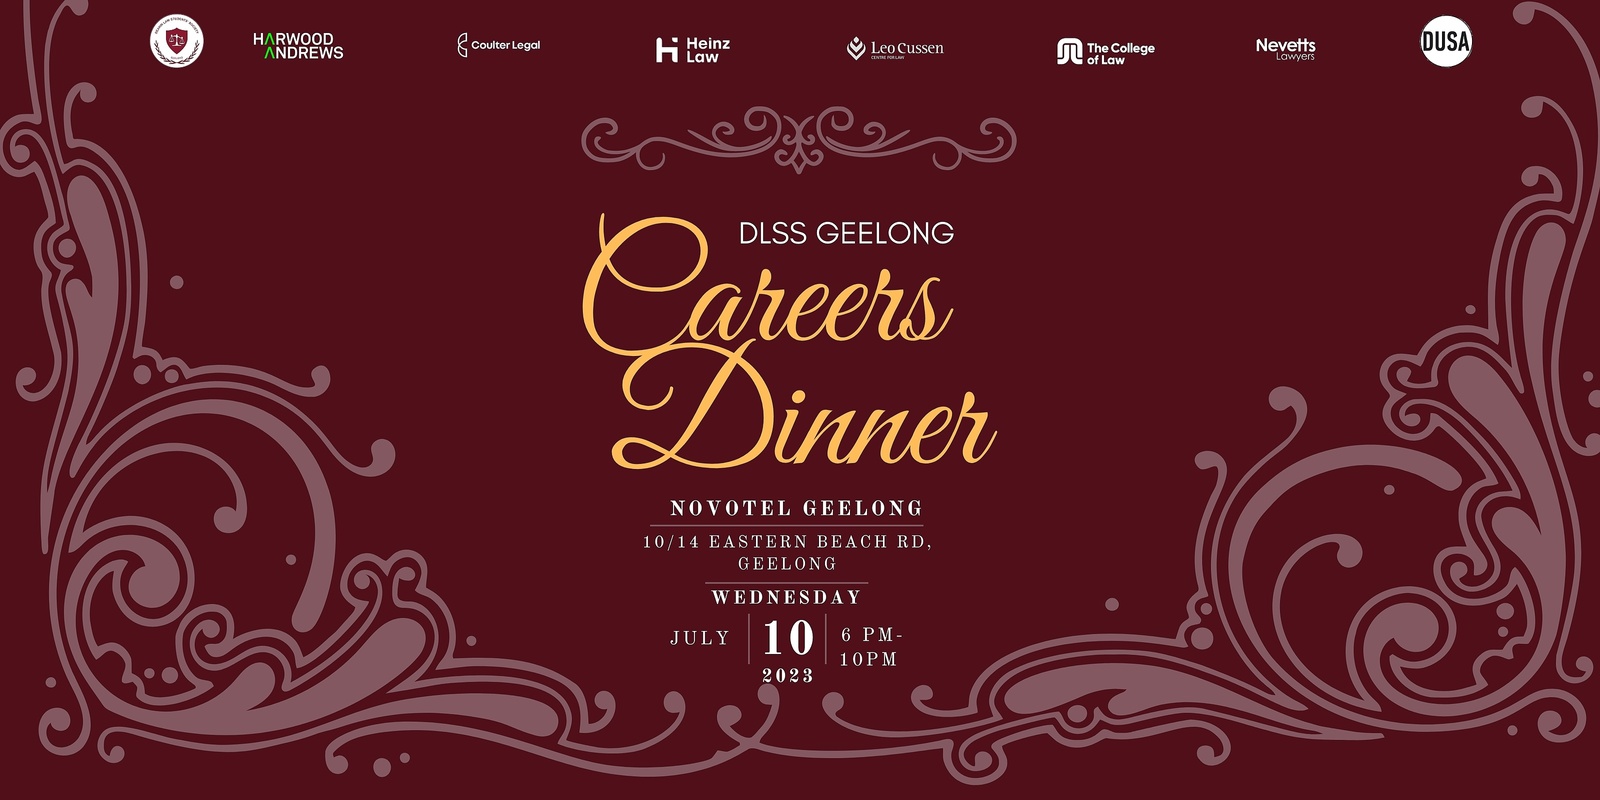 Banner image for Annual Careers Dinner - hosted by the Deakin Law Students' Society Geelong